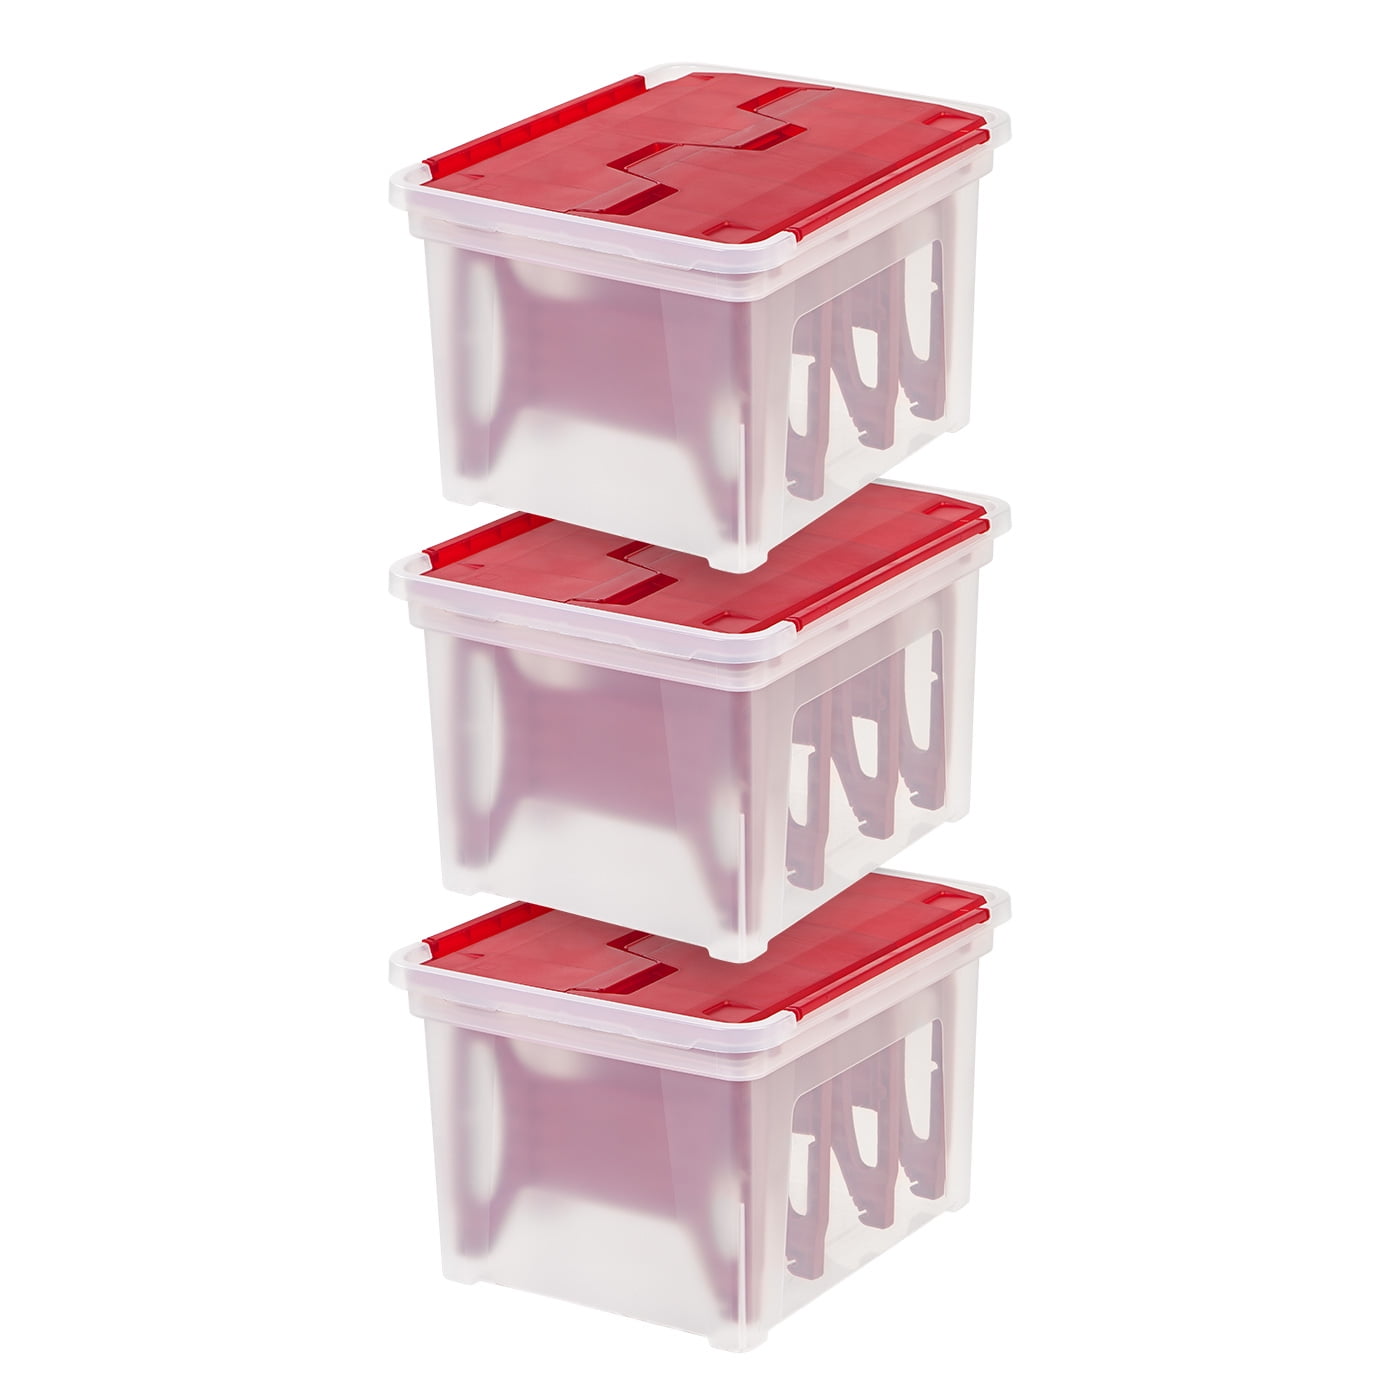 IRIS USA 26.7qt Ornament Holiday Storage Bin with 4-Compartment Container  and Handle, Clear/Red